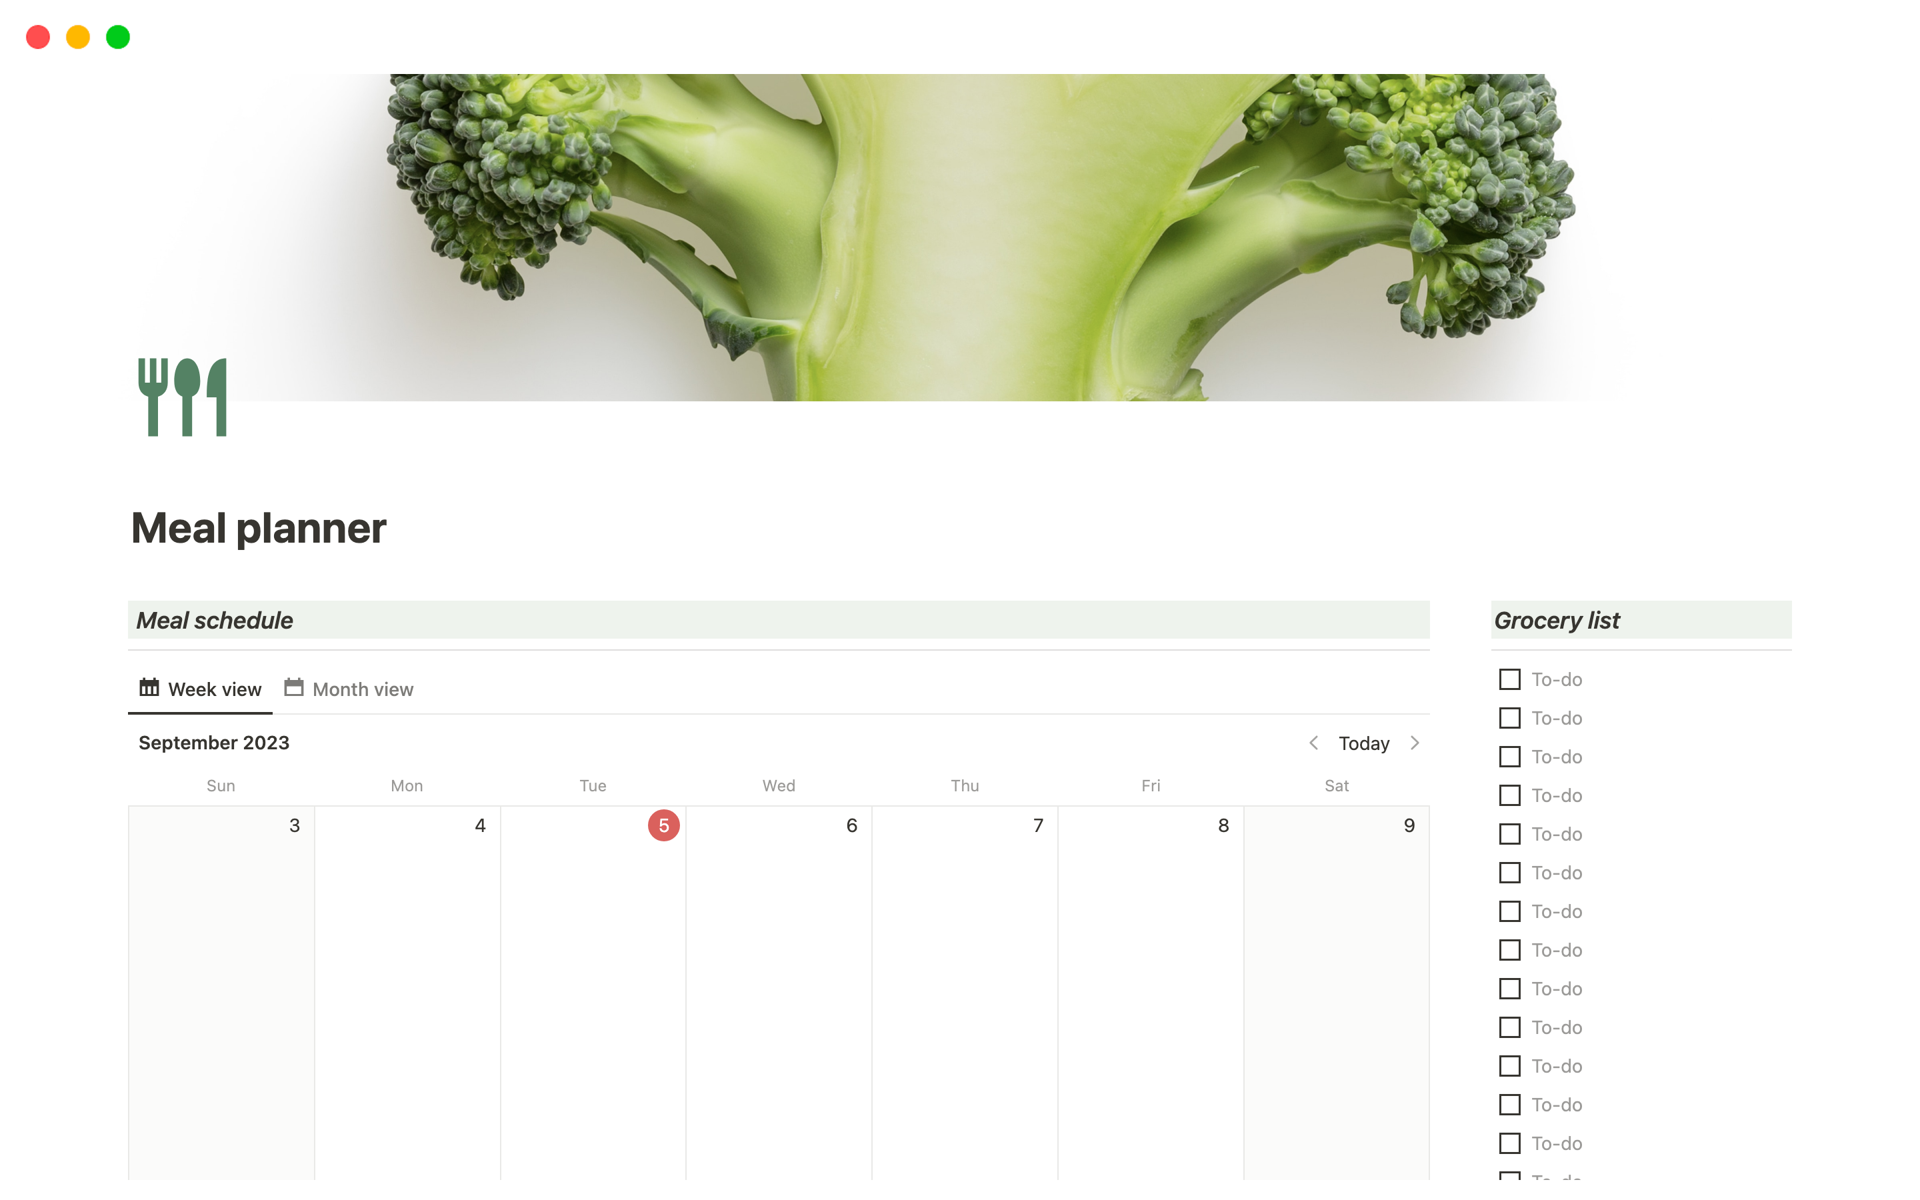 This template empowers you to efficiently arrange and manage your recipes, grocery lists, meal schedules, dietary goals, and more.